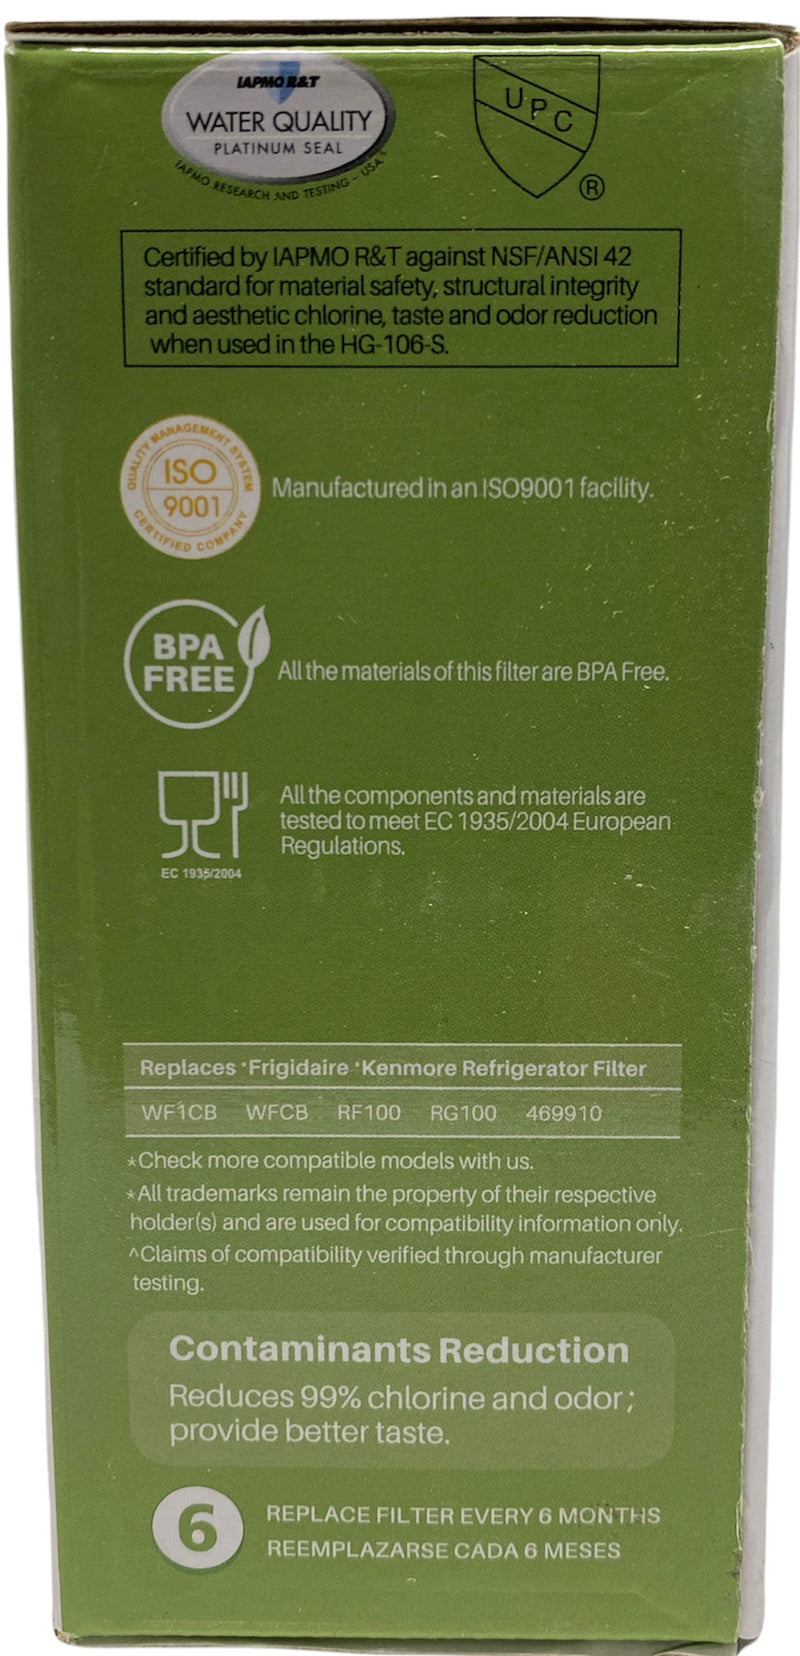 RWF2300A Refrigerator Water Filter IAPMO Certified Replacement for WF1CB, WFCB, RG100, NGRG2000, WF284, 9910, 469906, 469910 Refrigerator Water Filter